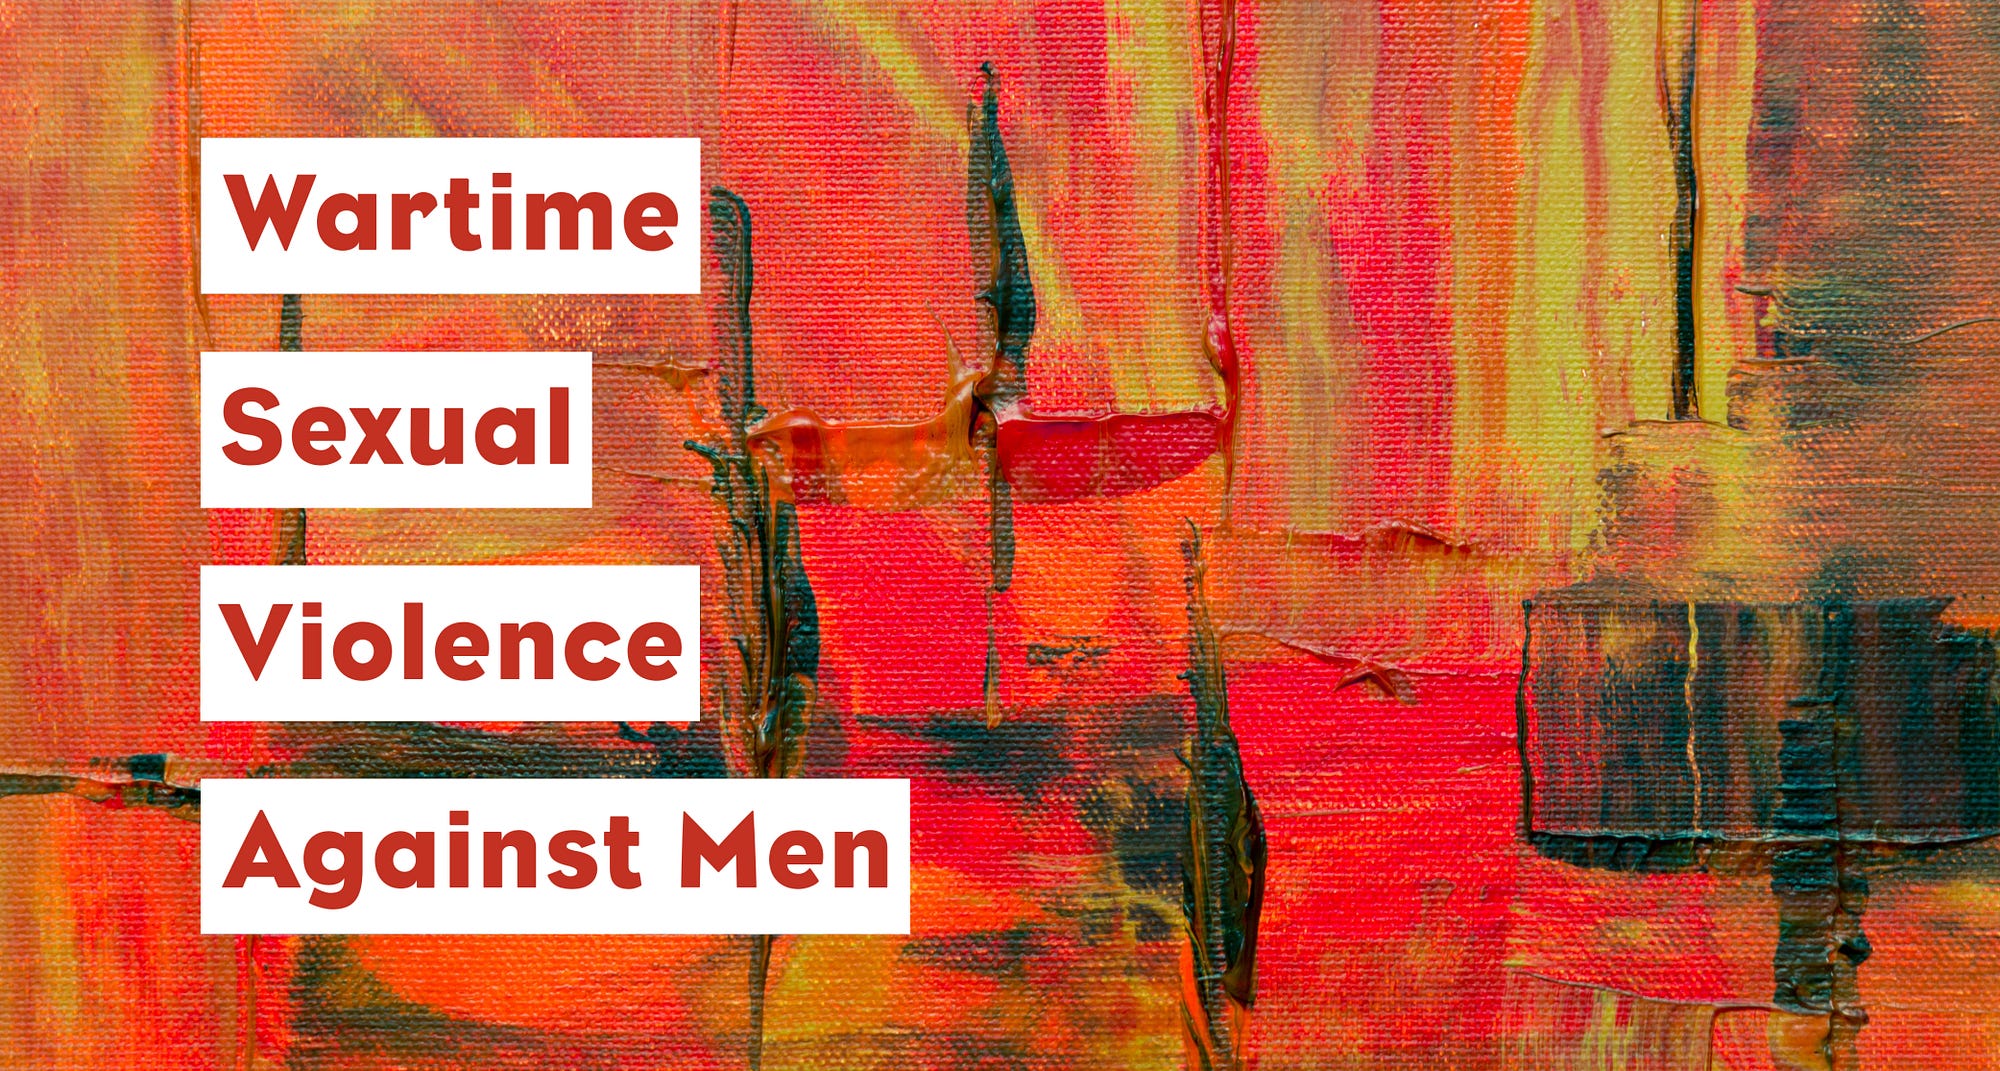 Wartime Sexual Violence Against Men The Hidden Face of Warfare by Rowman and Littlefield International Colloquium Medium image pic